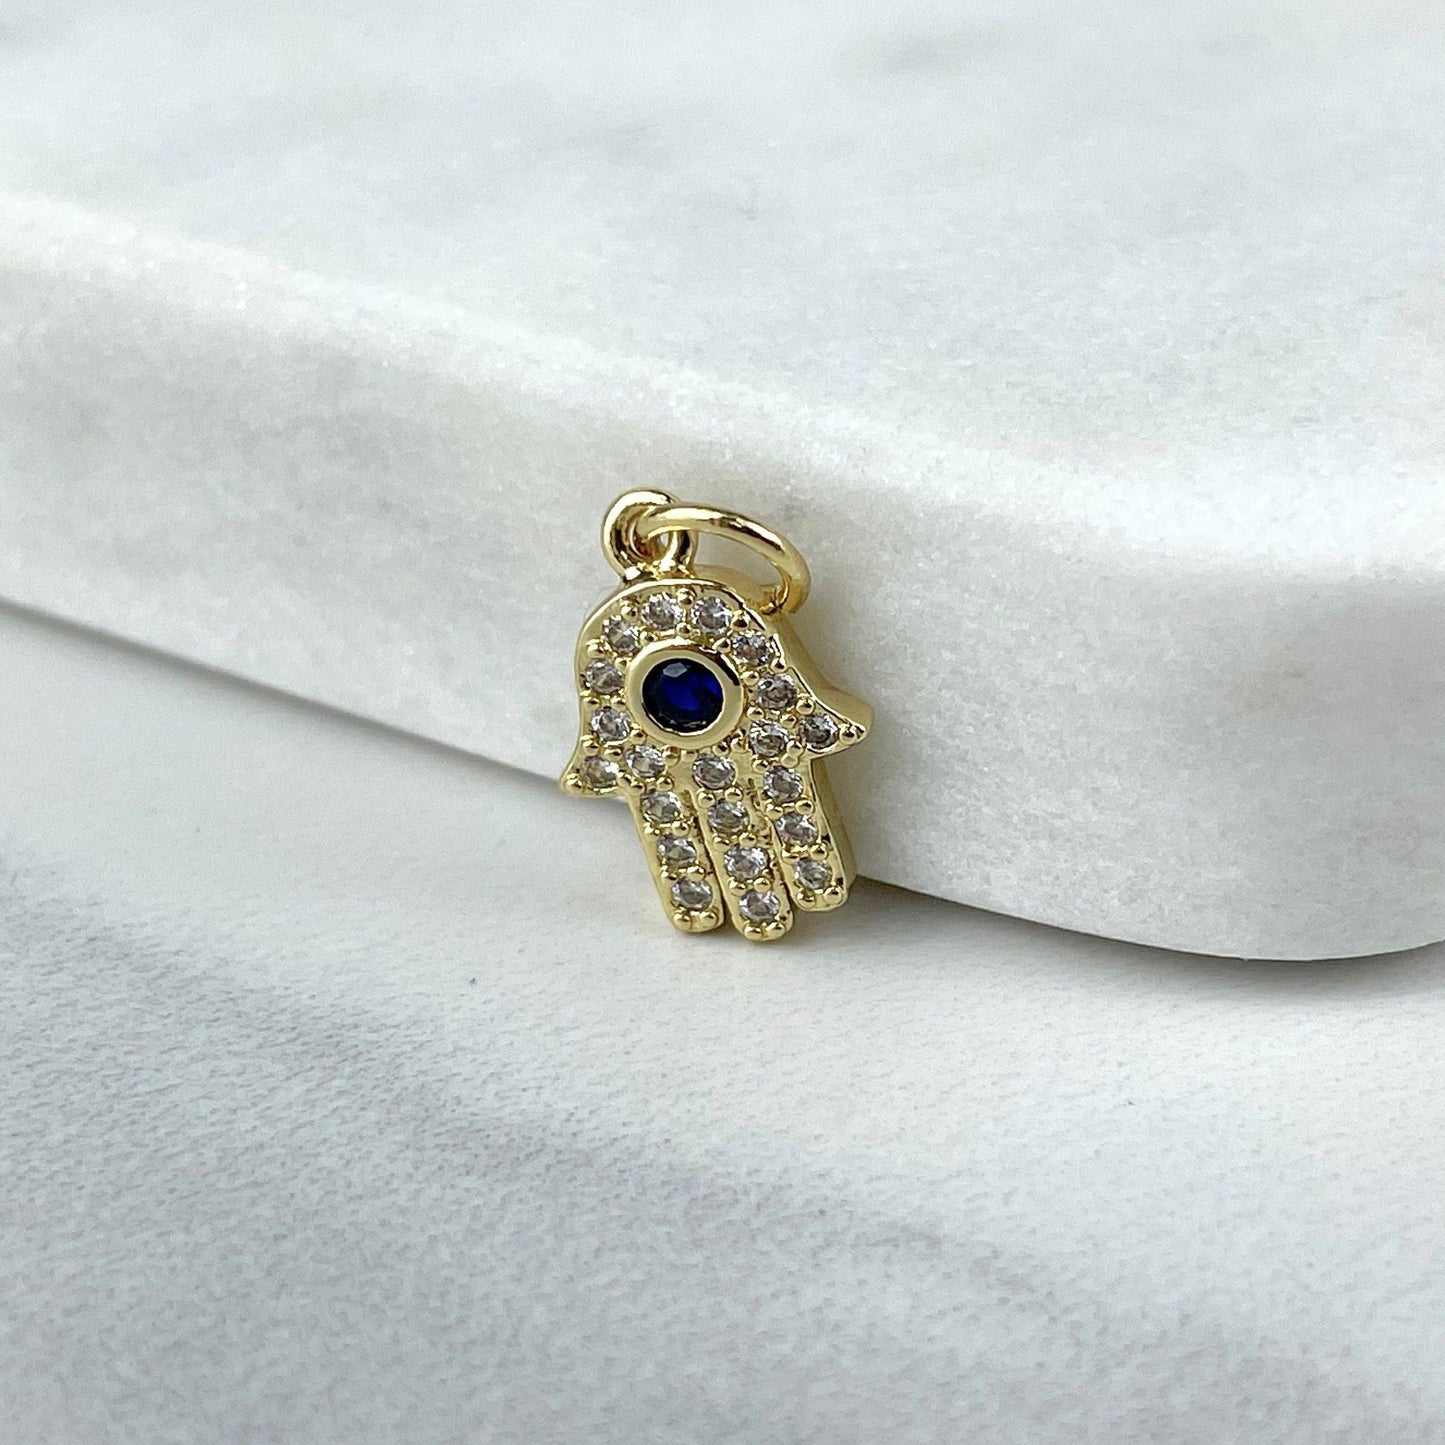 18k Gold Filled Micro Pave Cubic Zirconia Hamsa Hand or Horseshoe Charms Wholesale Jewelry Making Supplies